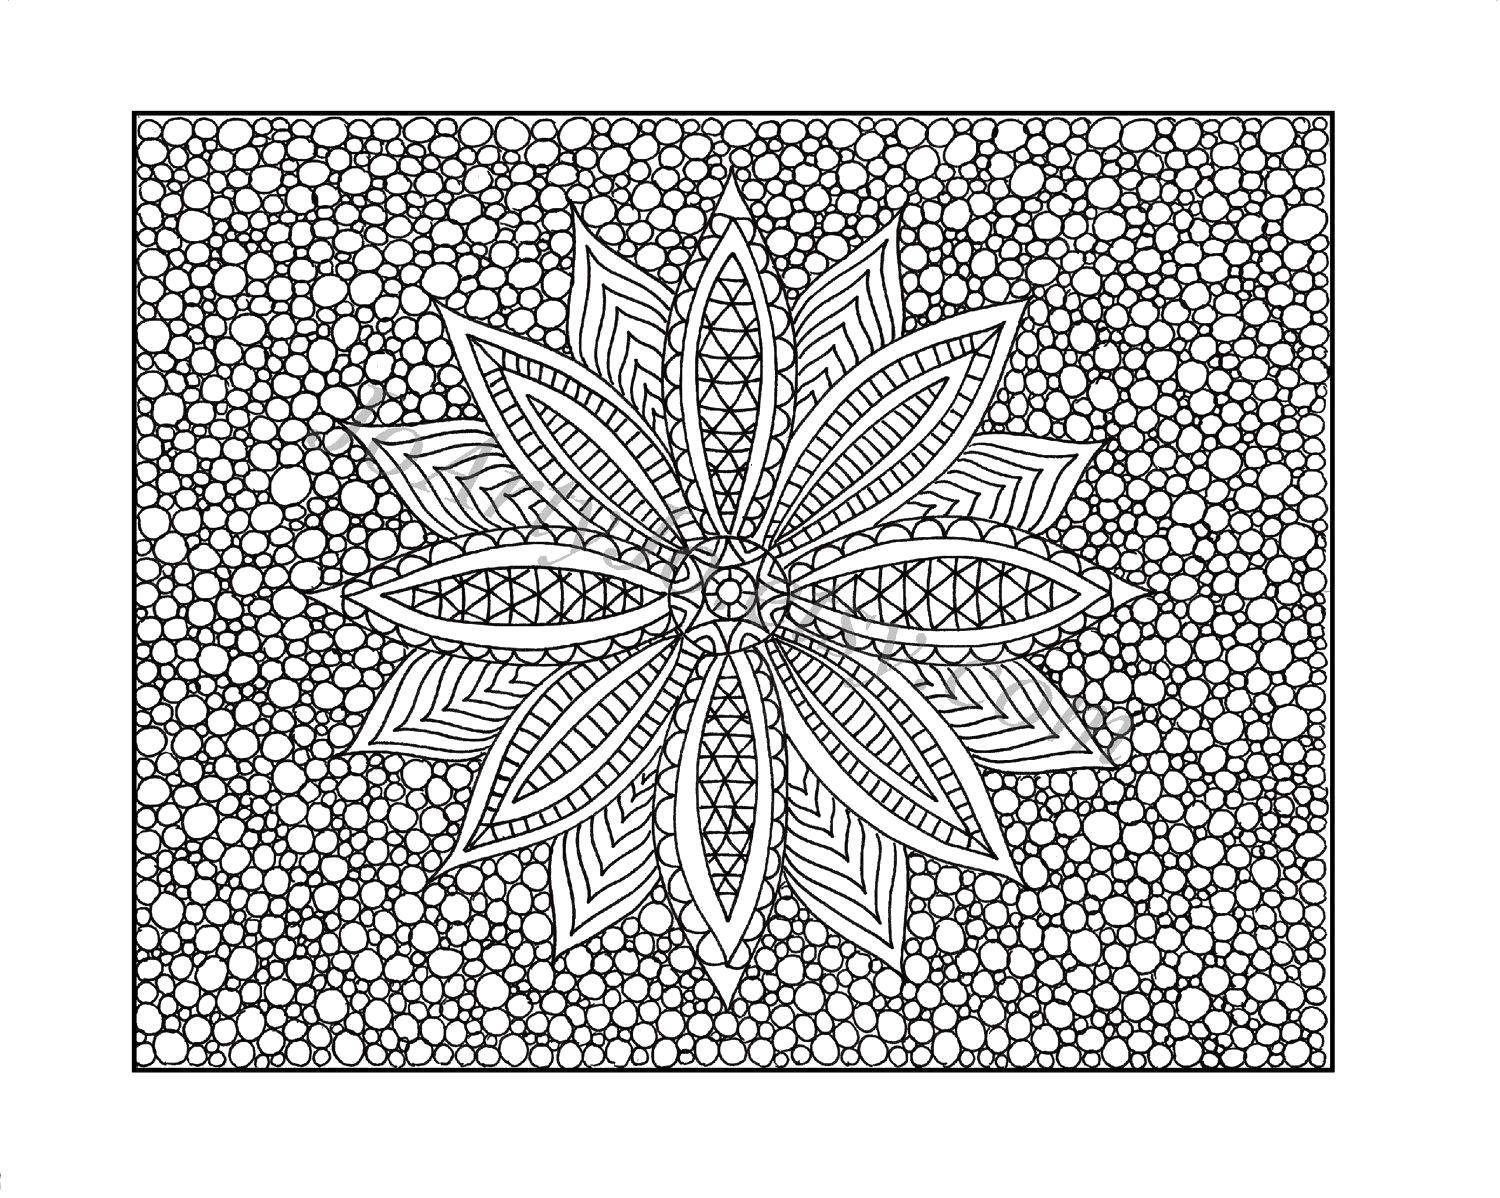 Coloring Intricate pattern with small details. Category Patterns with flowers. Tags:  Patterns, flower.